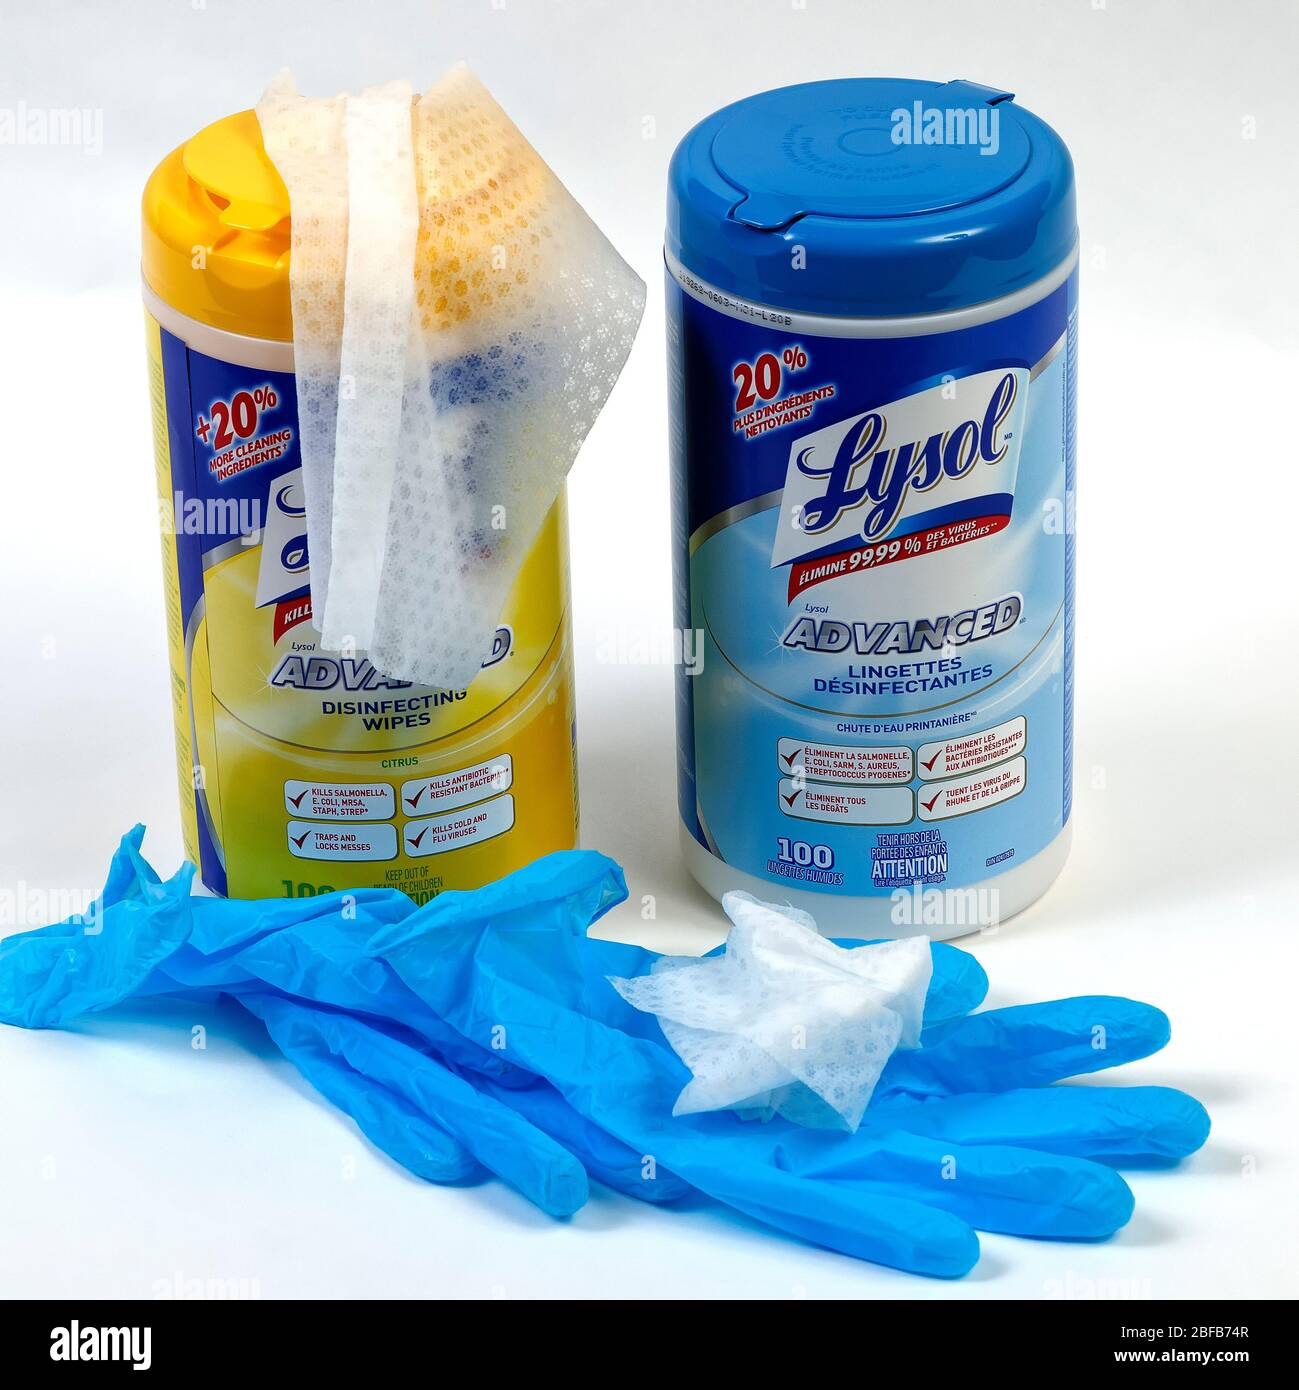 Three Kitchen Wipes for Cleaning Dust. Stock Image - Image of